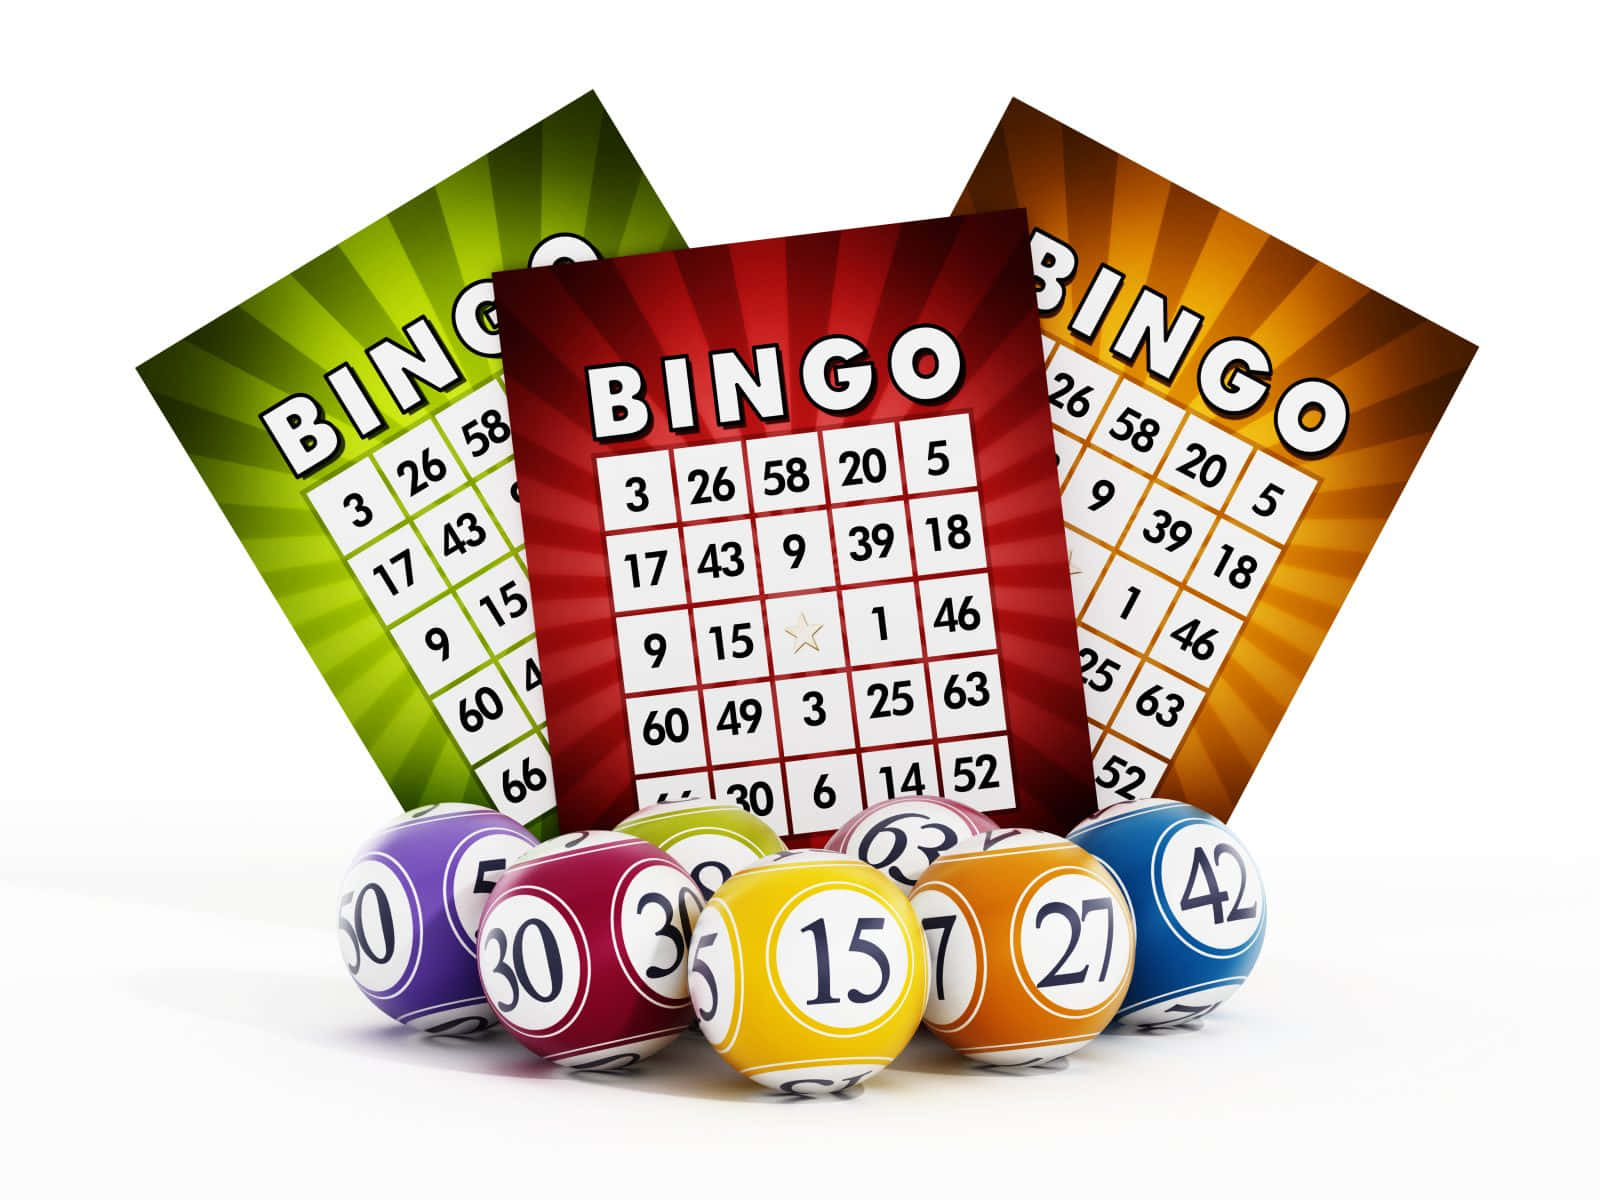 Bingo Cards And Balls On A White Background